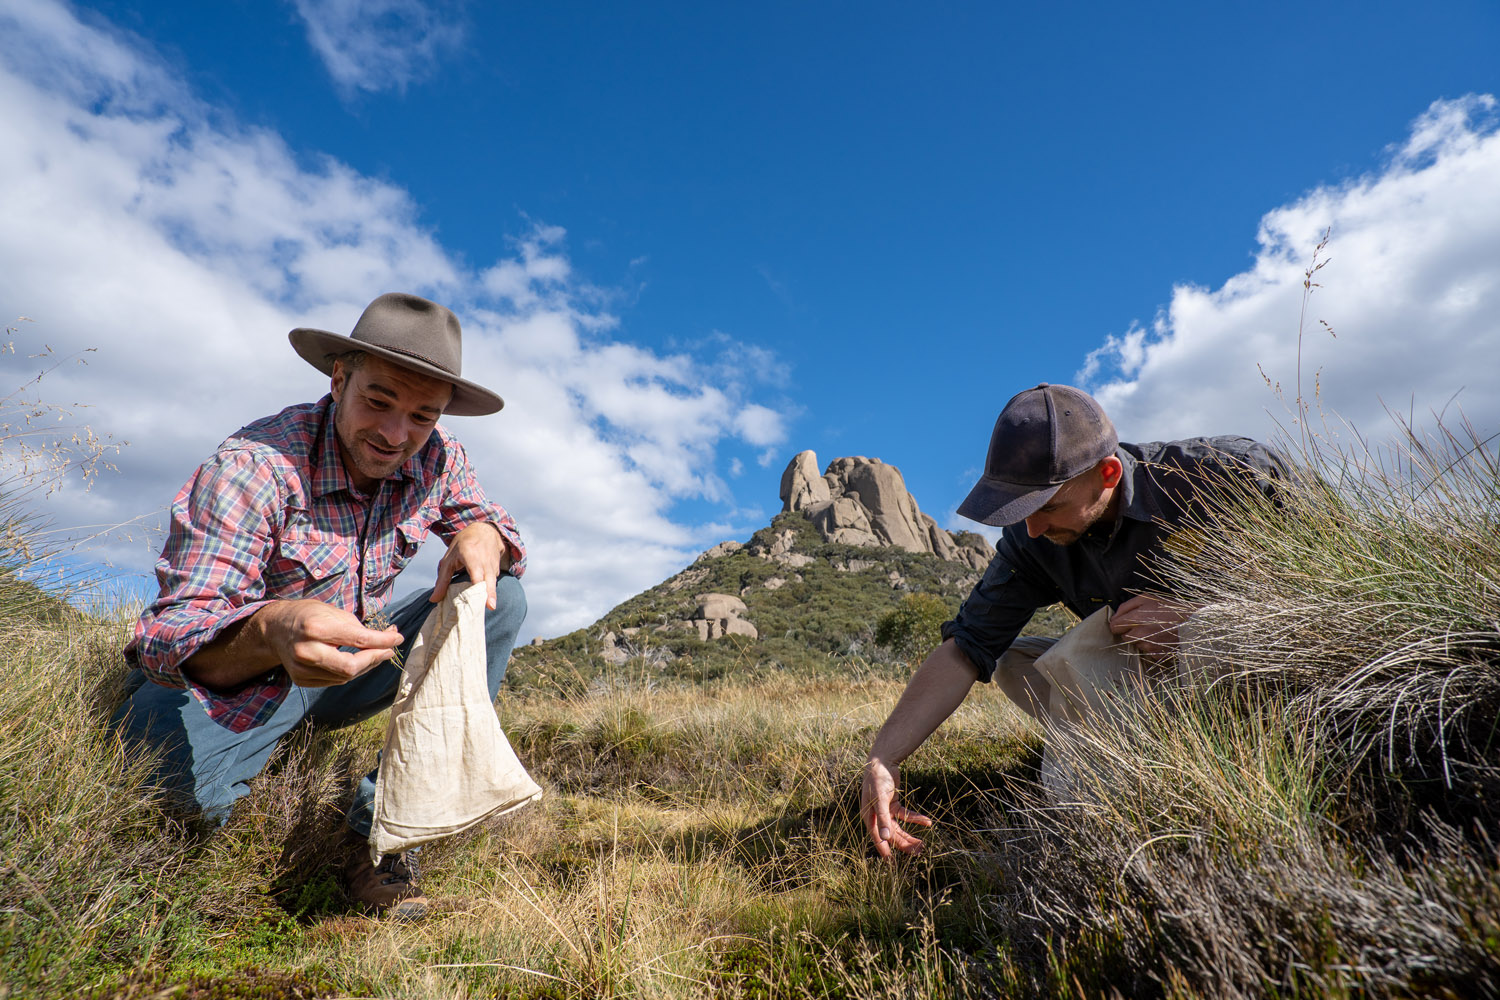 Field collection Mount Buffalo 2020. L-R Andre Messina, Botanist and Matthew Henderson Horticulturist